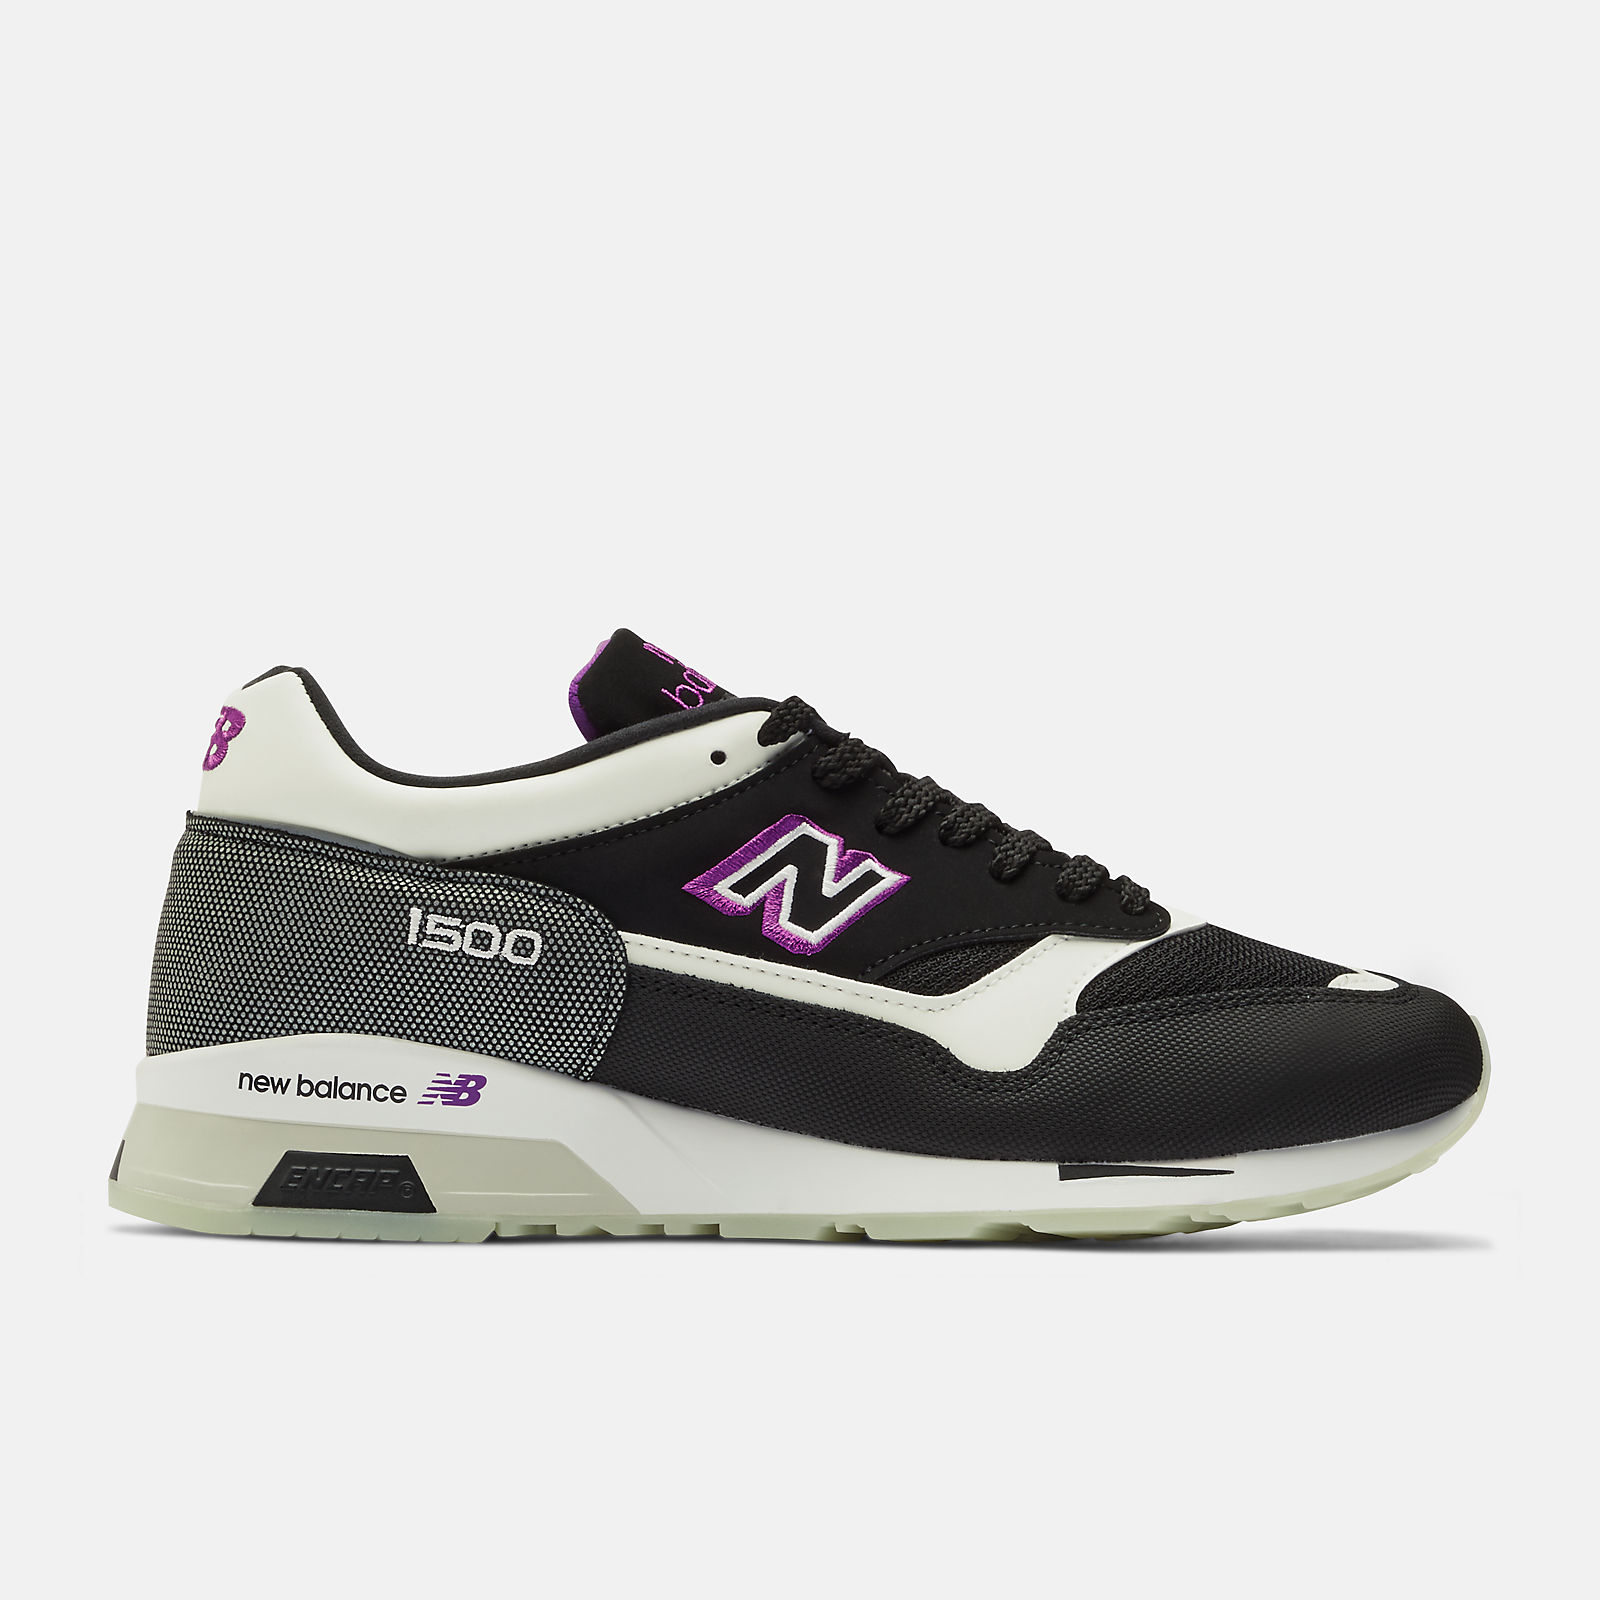 Nb 1500 nonwee